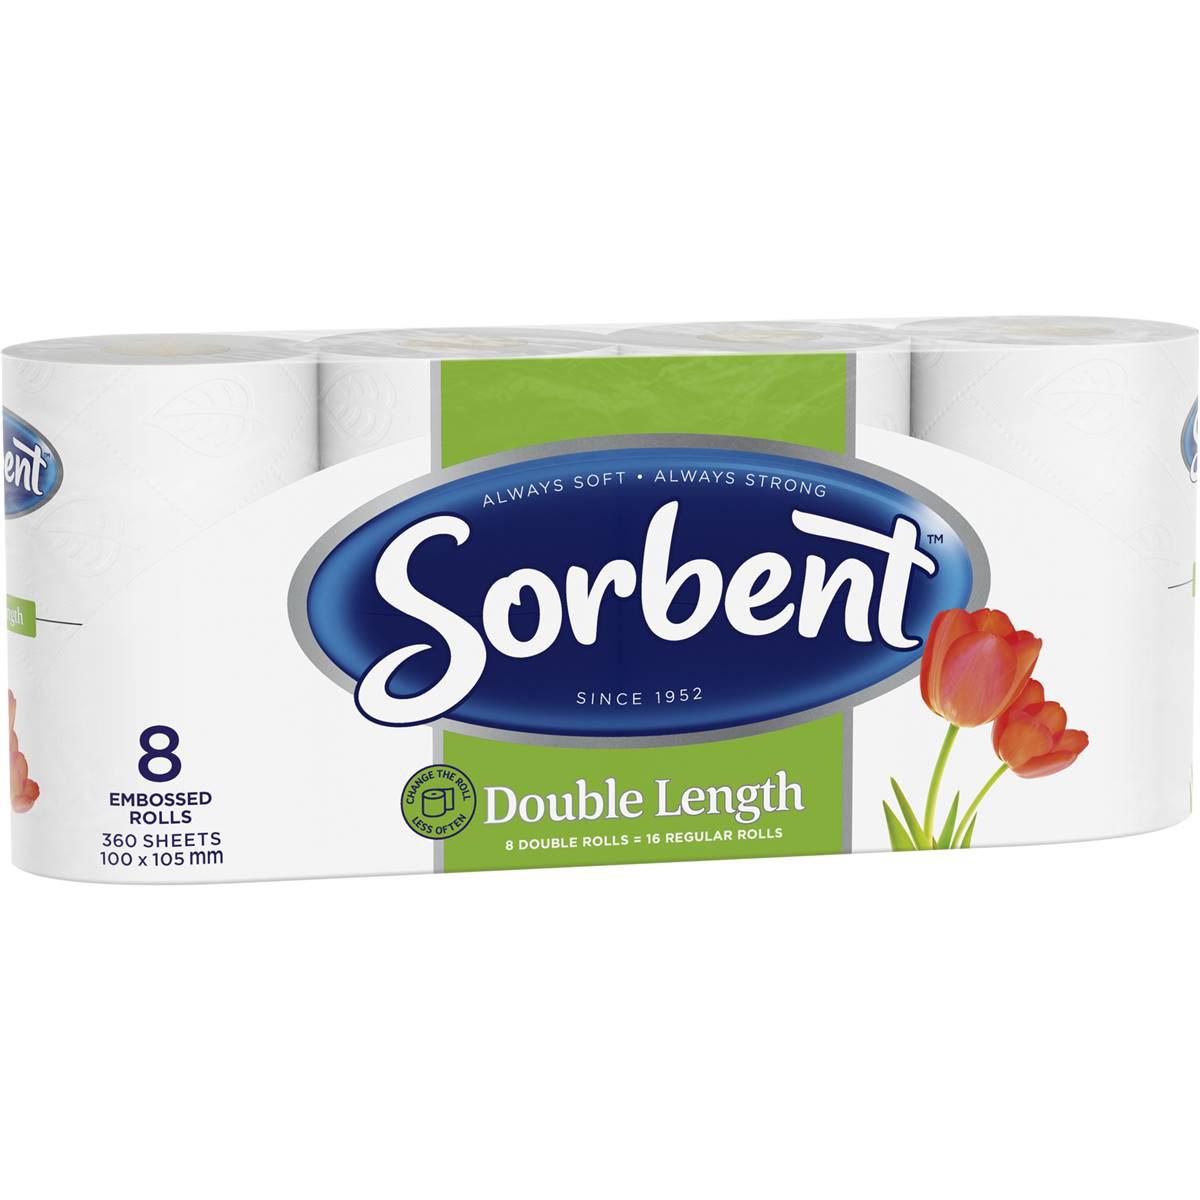 Sorbent Double Length Toilet Tissue 8 Pack